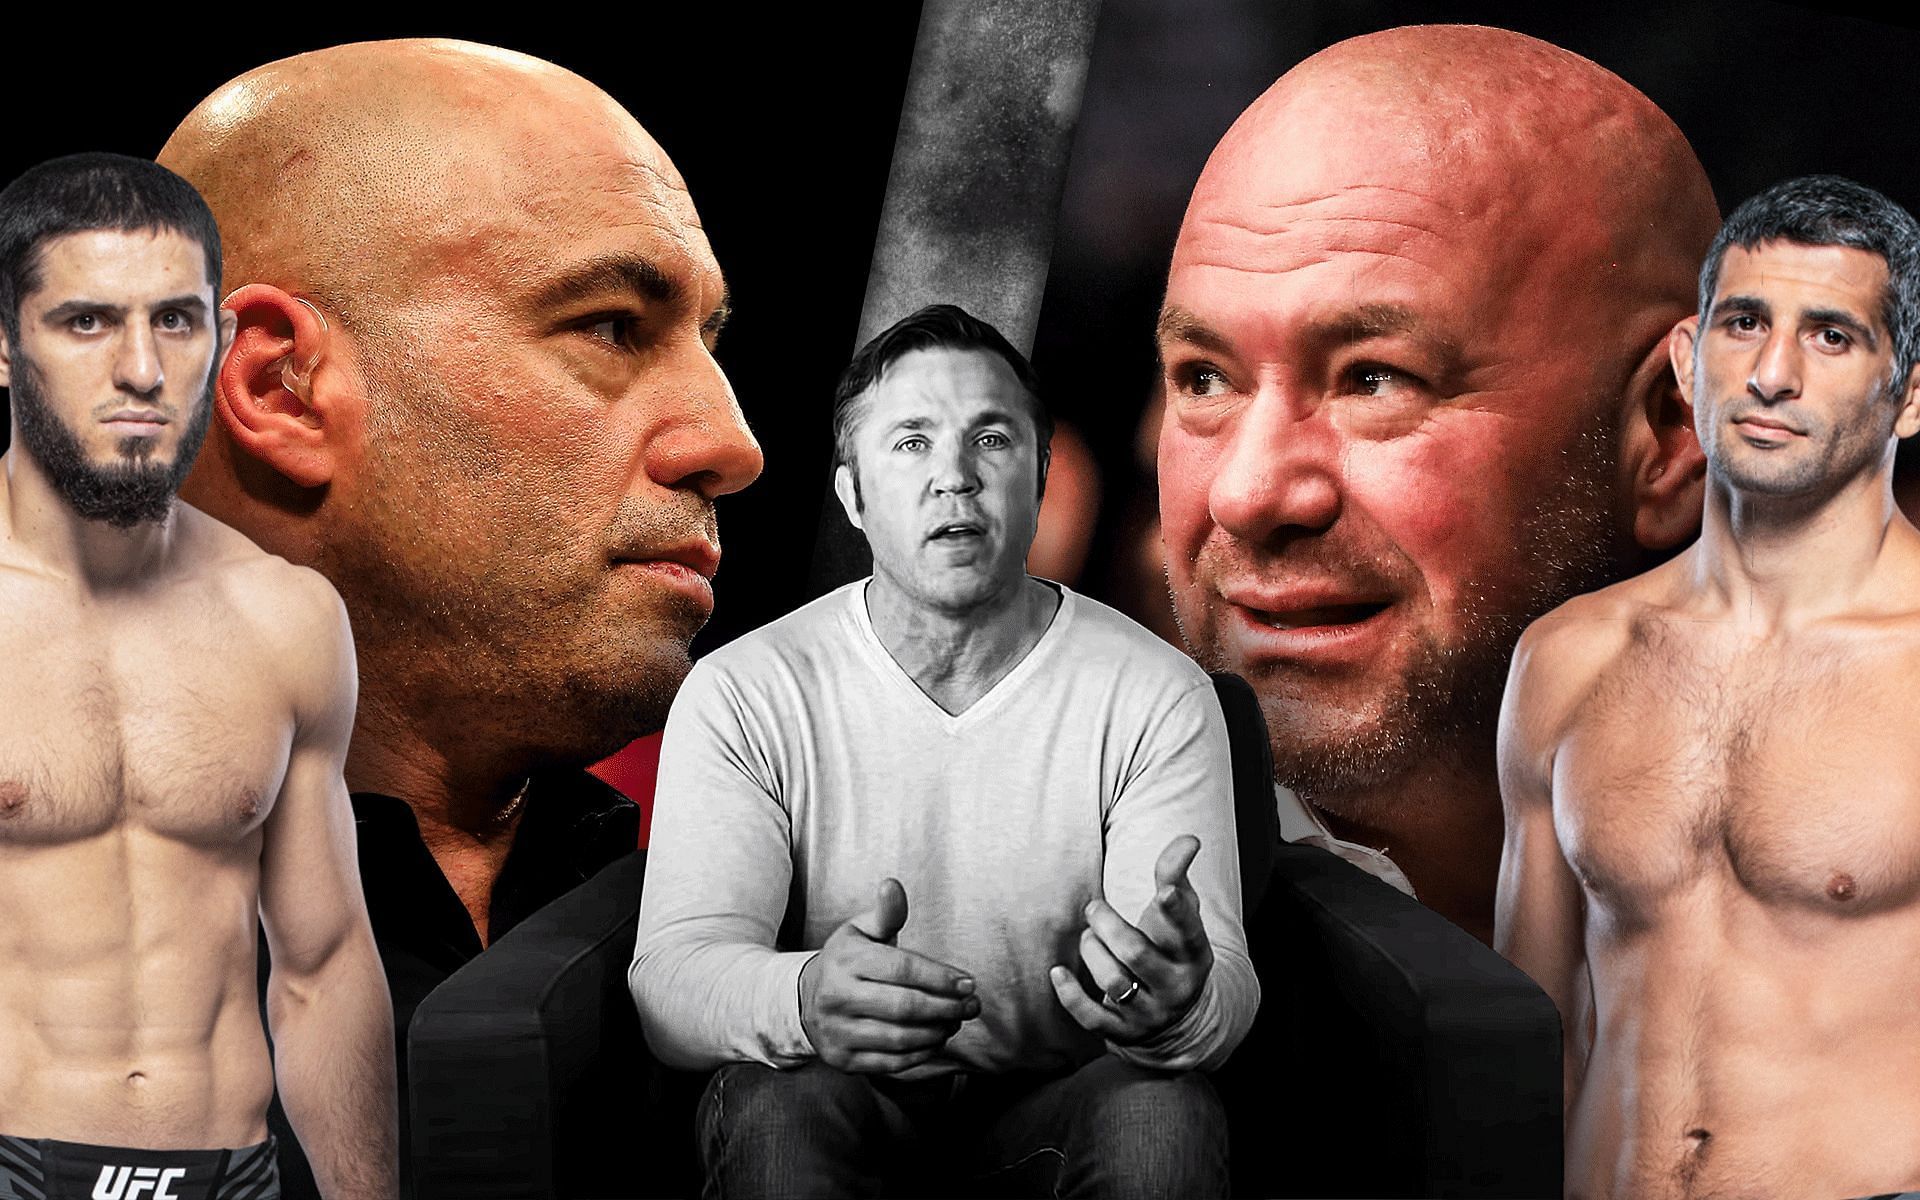 Chael Sonnen weighs in on Joe Rogan&#039;s apparent aversion towards a fight between Islam Makhachev and Beneil Dariush [Sonnen image courtesy - Chael Sonnen on YouTube, Islam and Beneil images courtesy - ufc.com, White and Rogan images courtesy - Getty]